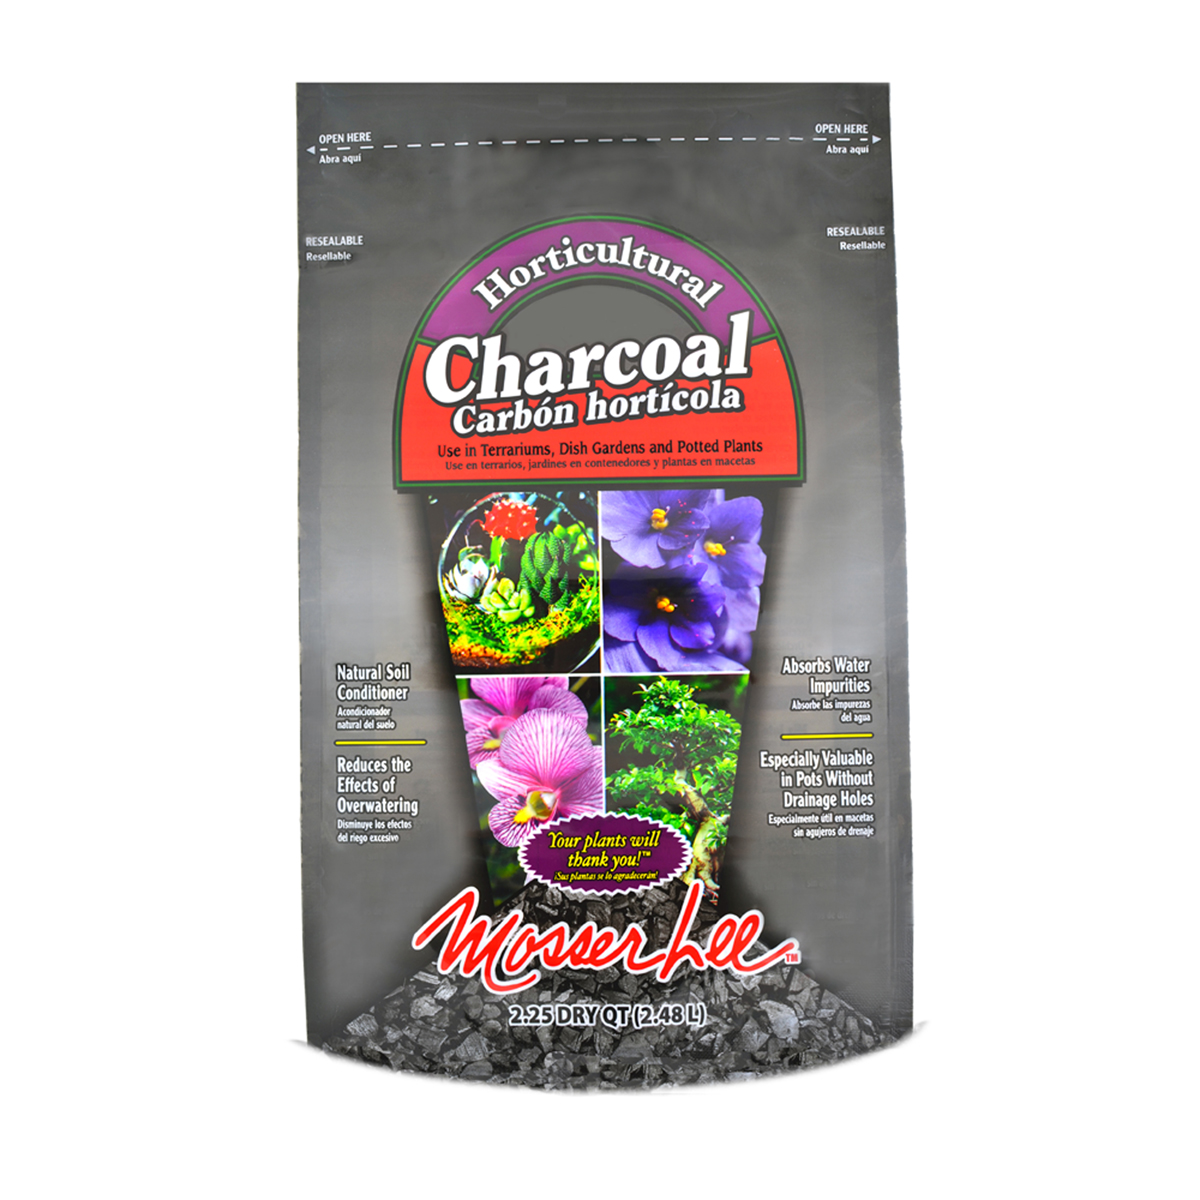 Horticultural Charcoal